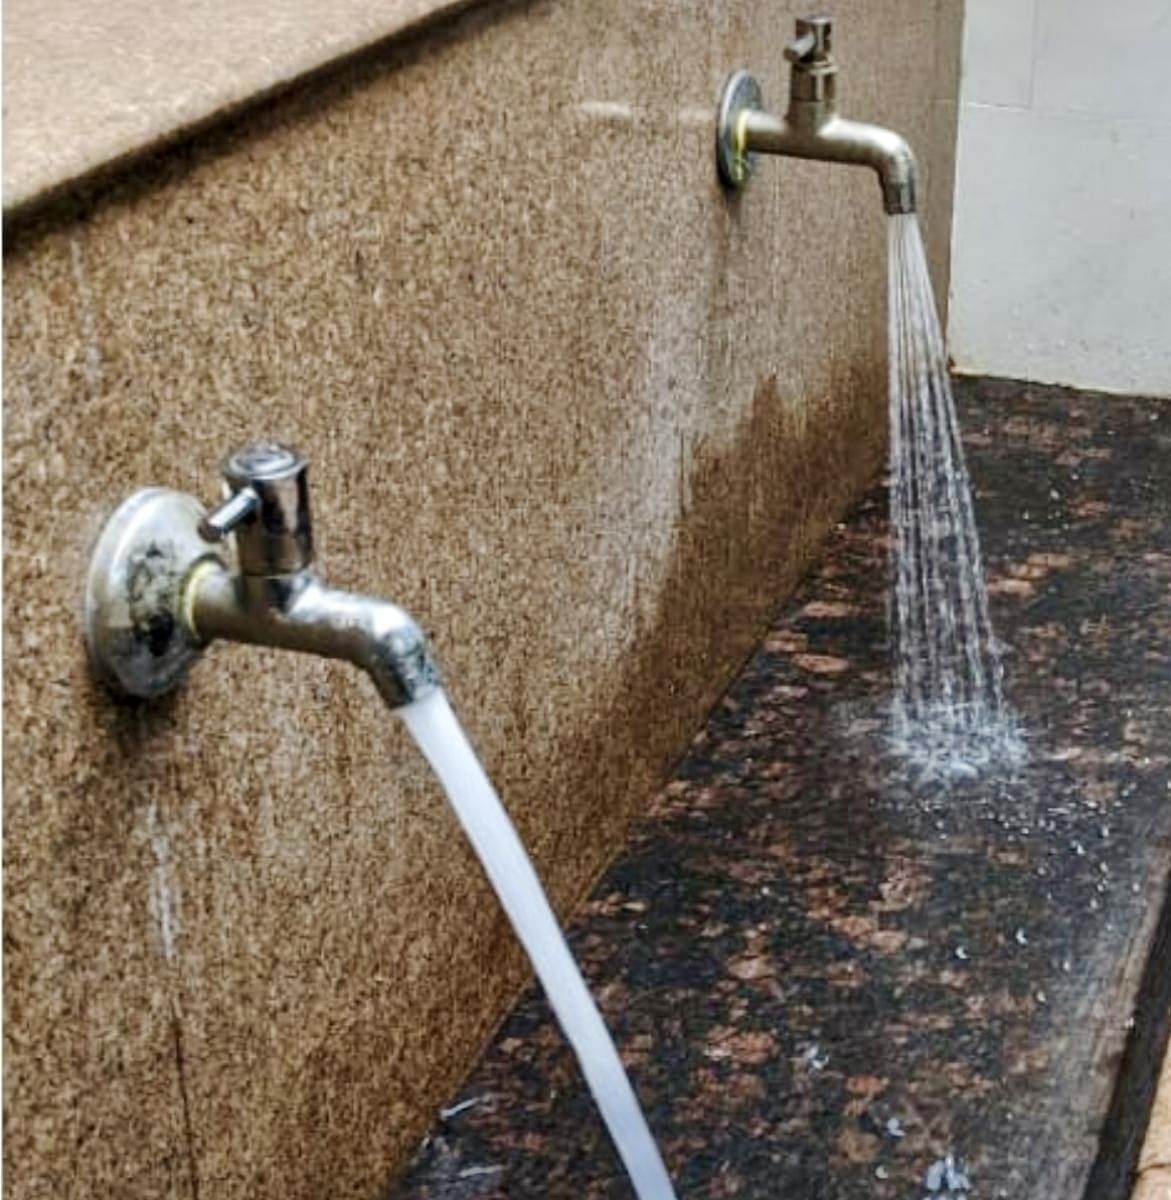 A water aerator can reduce water flow from 10 to 15 litres per minute to 4 to 6. The difference can be seen in these two taps at Shri Akhila Havyaka Mahasabha in Malleshwaram. 